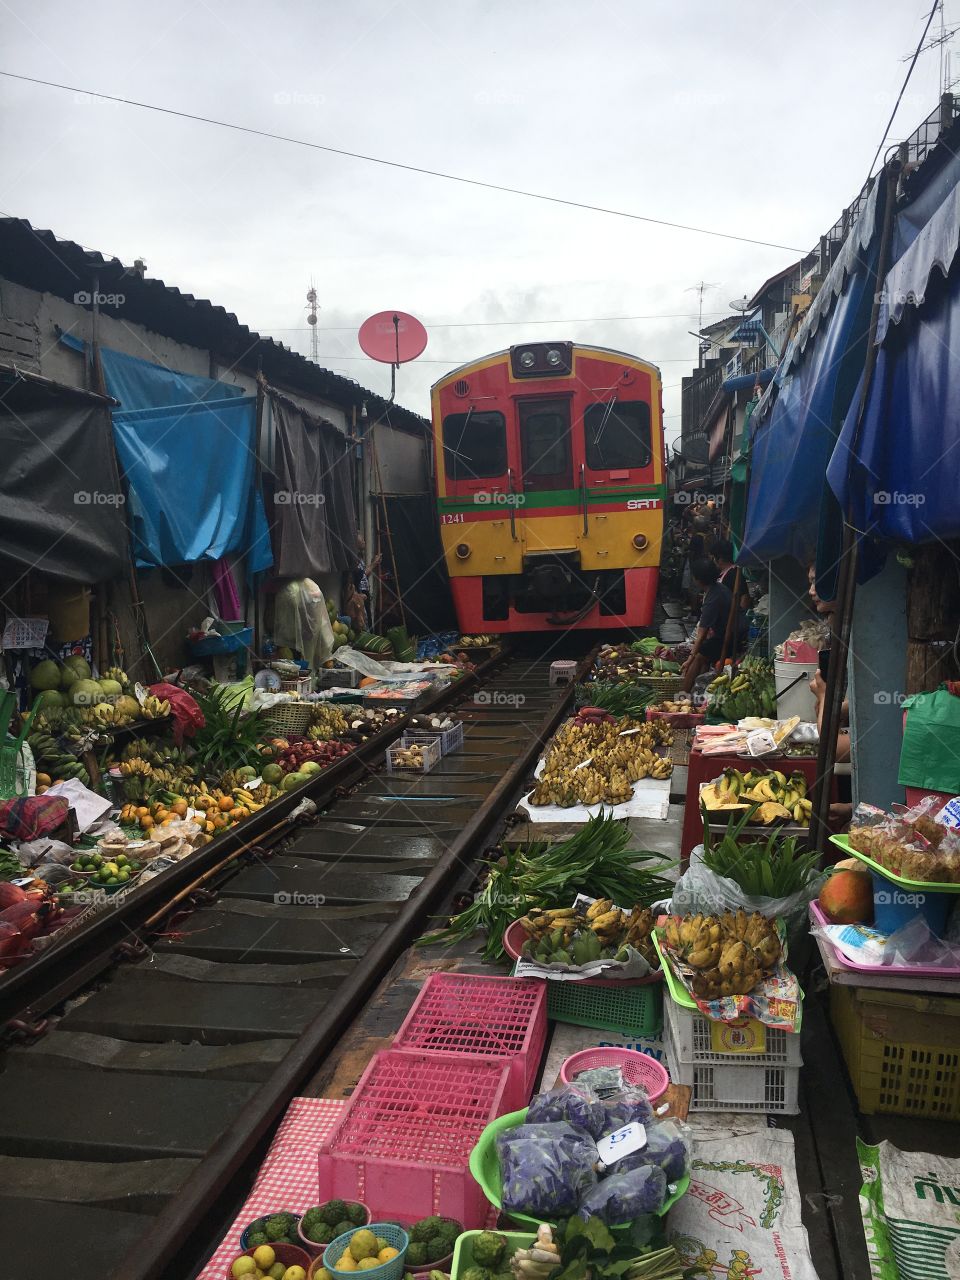 5 times a day, vendors at this market pull their produce out of the way for the incoming train 🚂